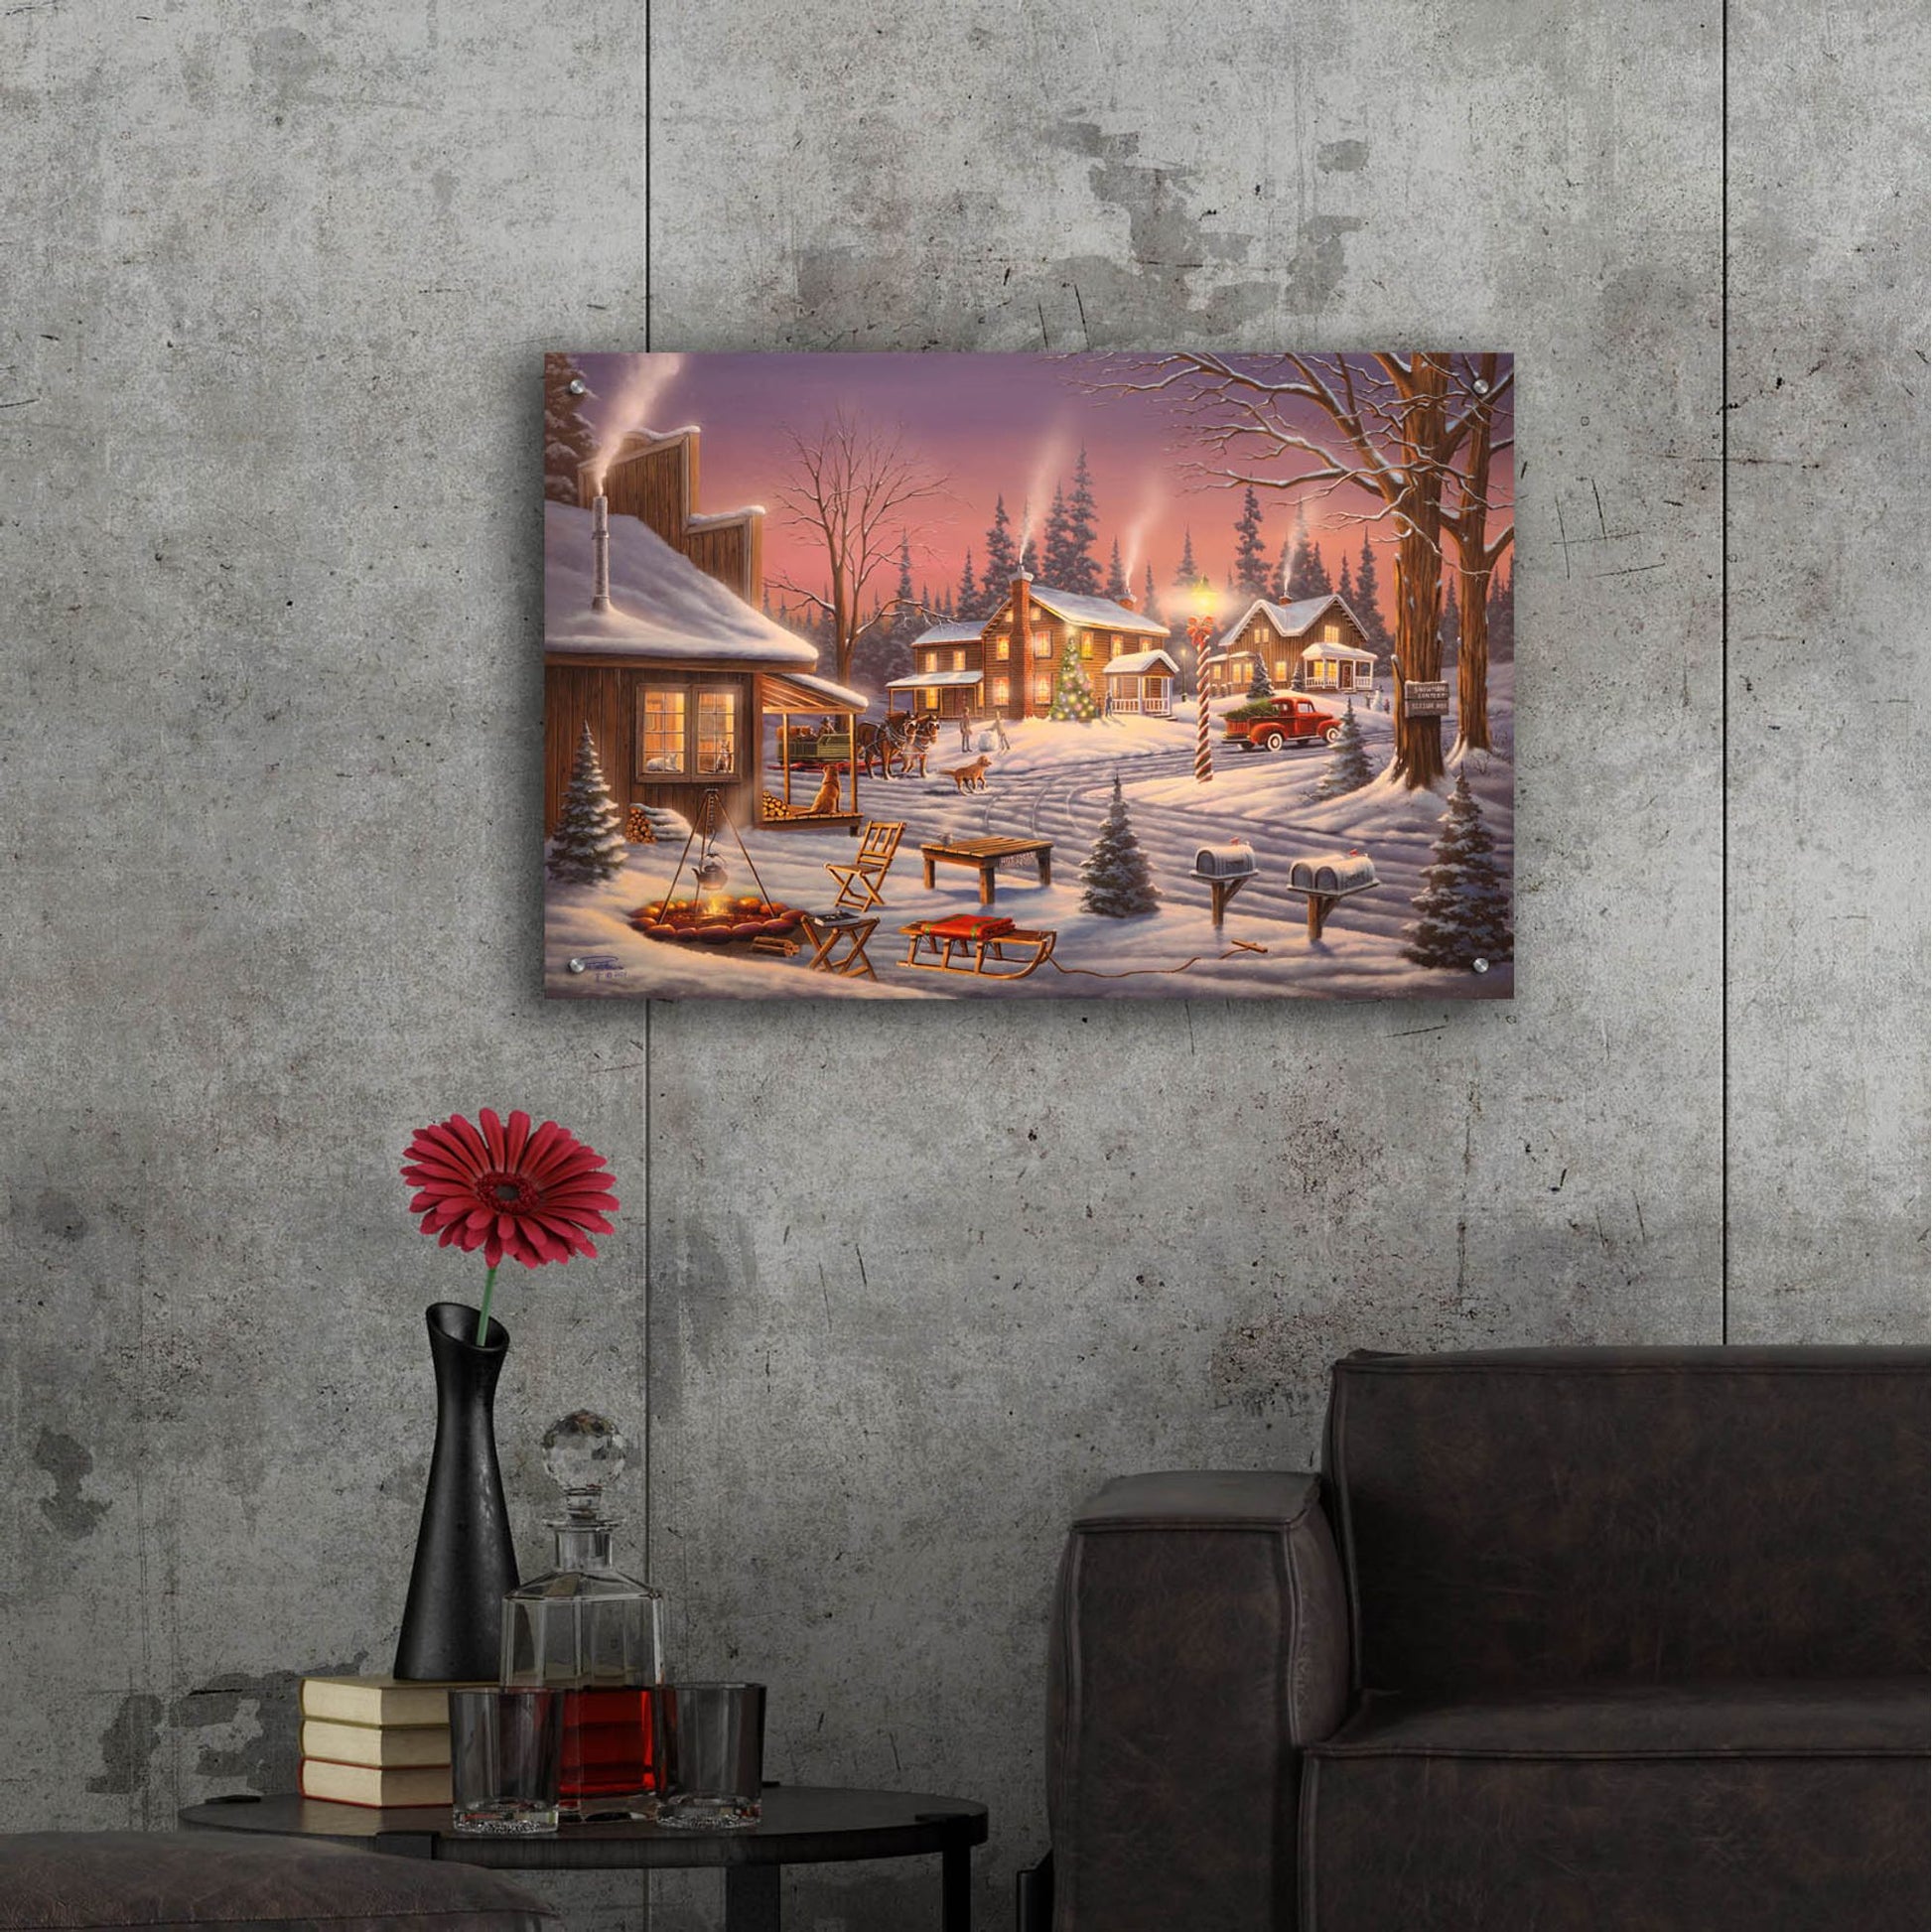 Epic Art 'Holiday Festivities' by Geno Peoples, Acrylic Glass Wall Art,36x24